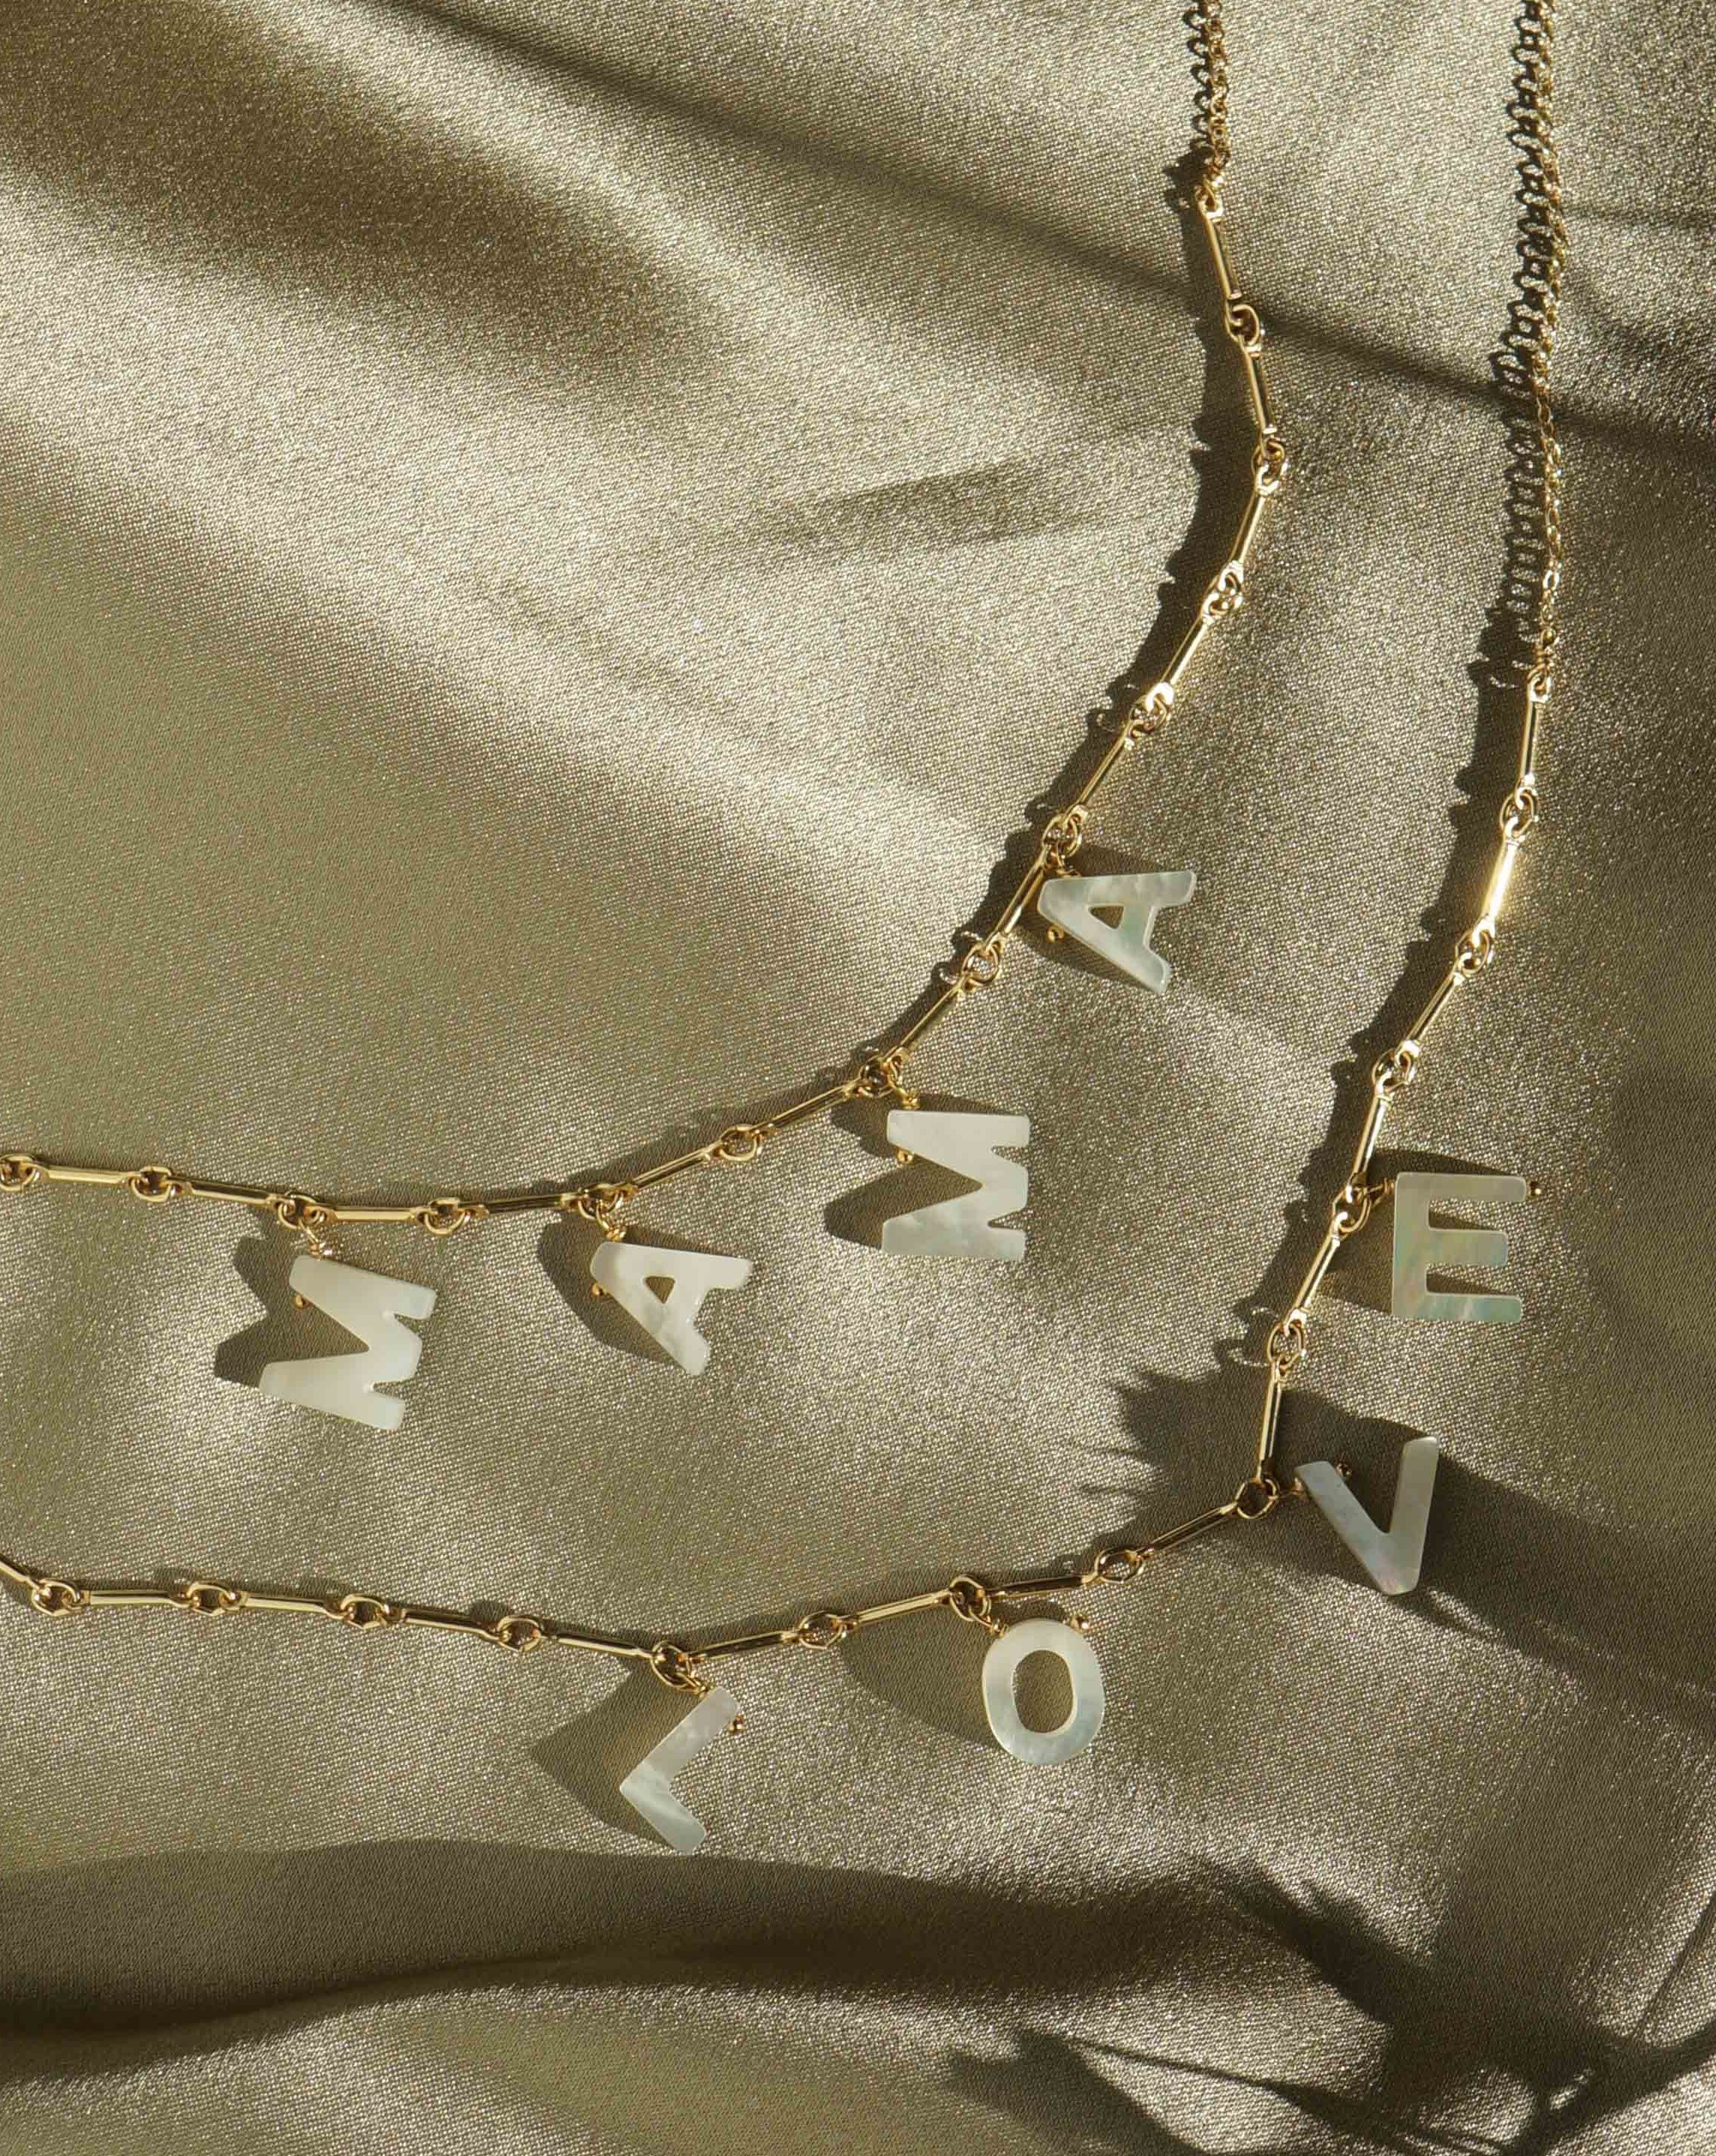 Love Necklace by KOZAKH. A 16 to 18 inch adjustable length necklace with linked bar chain on bottom half and flat link chain on top half, crafted in 14K Gold Filled, featuring a customizable word made from hand carved Mother of Pearl letters.